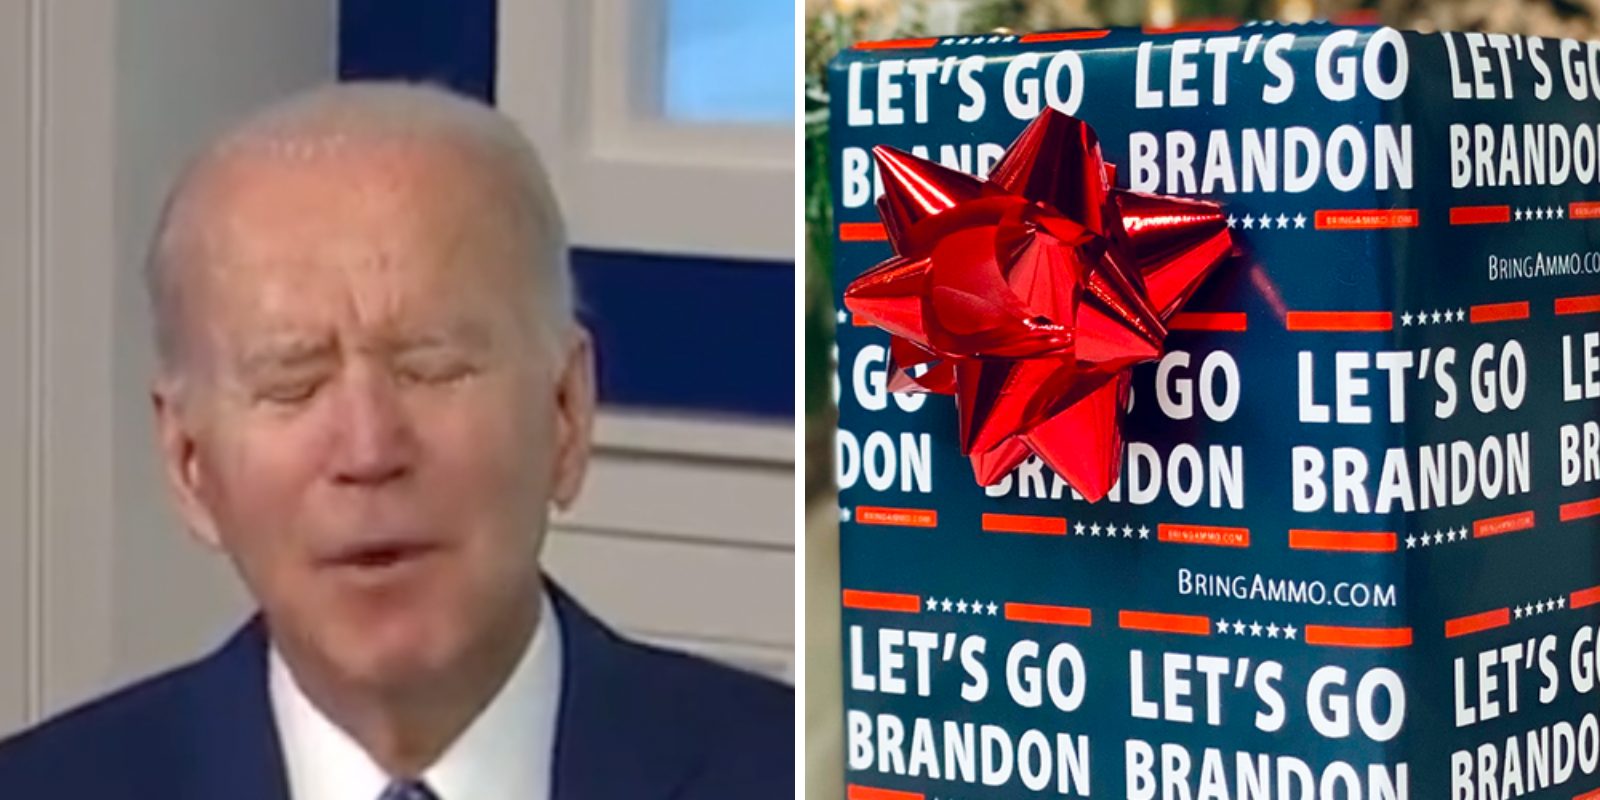 BREAKING: Biden says 'Let's go Brandon, I agree' during Christmas call with kids and parents